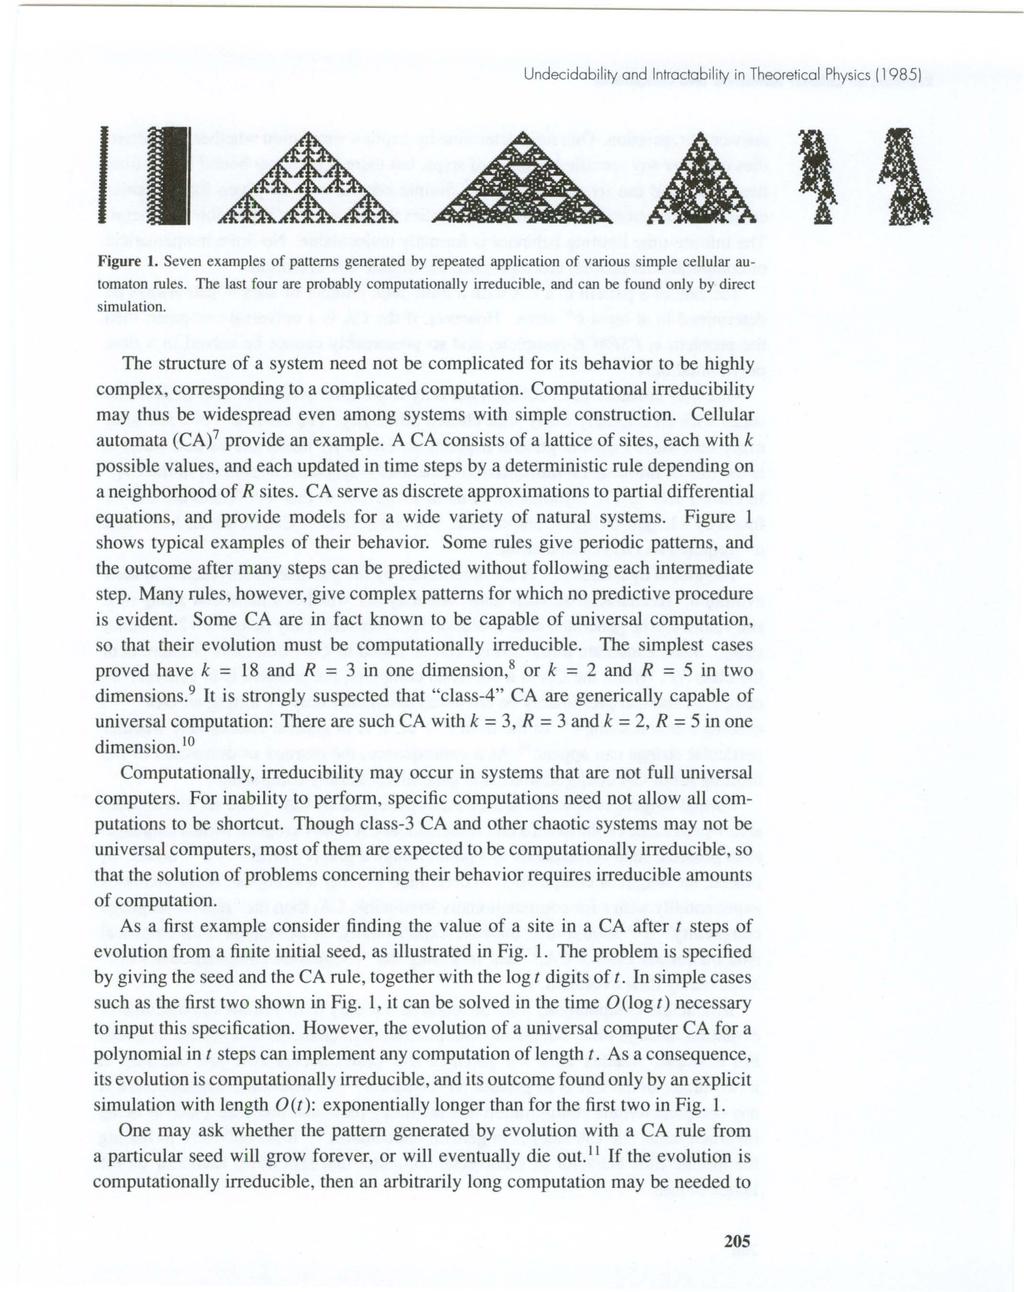 Undecidability and Intractability in Theoretical Physics (1985) I Figure 1. Seven examples of patterns generated by repeated application of various simple cellular automaton rules.